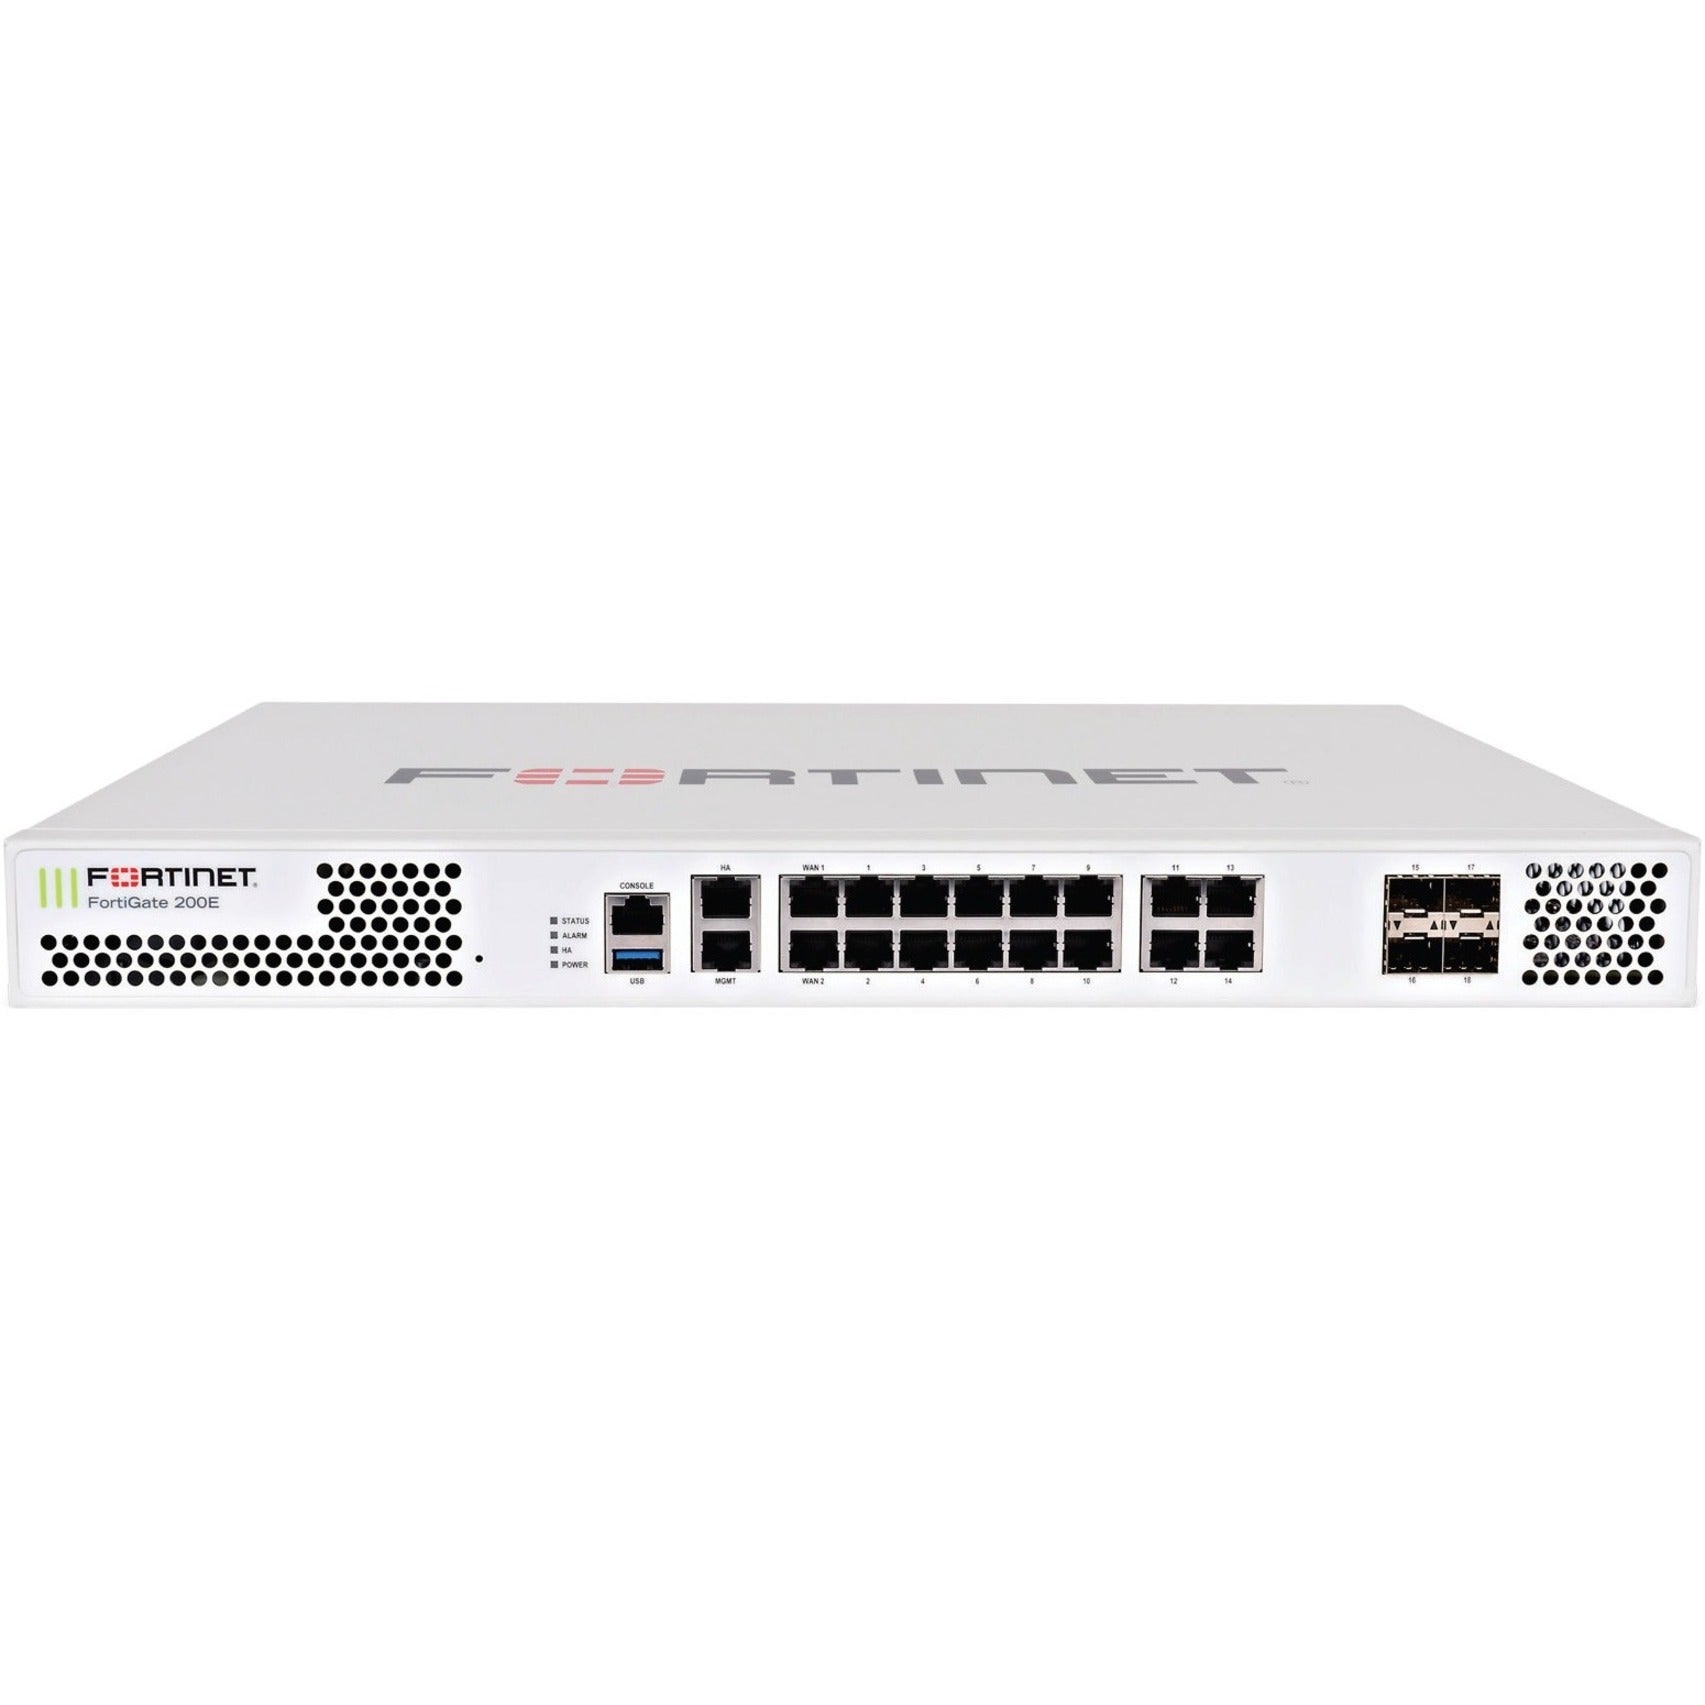 Fortinet FG-200E FortiGate Network Security/Firewall Appliance, Intrusion Prevention, Antivirus, Application Control, Threat Protection